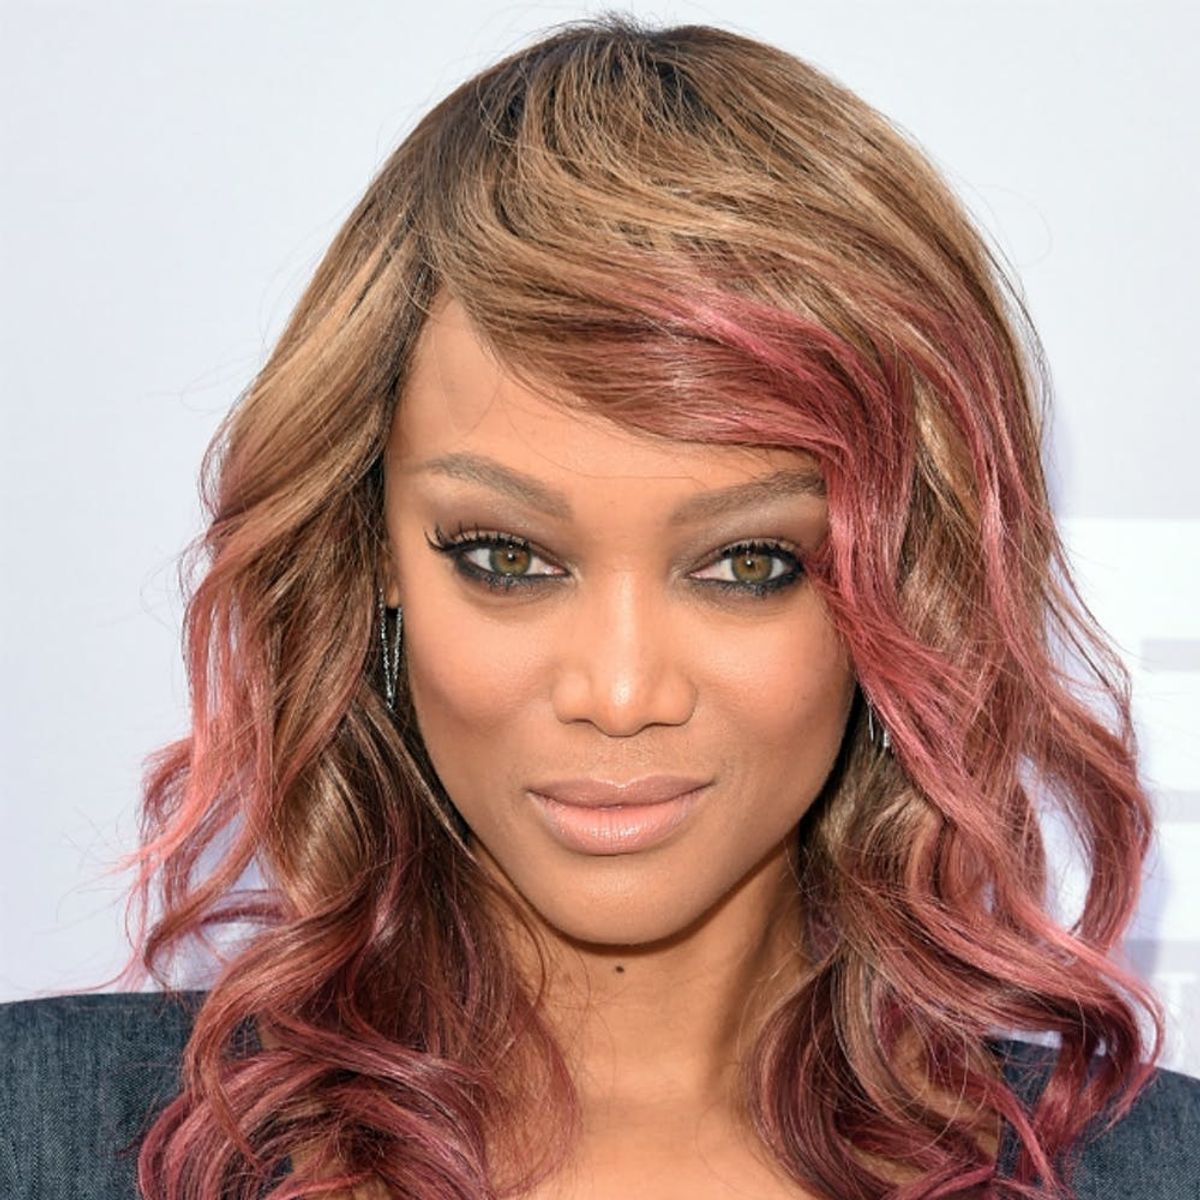 Tyra Banks Shares The Sweet First Pic of Her New Baby Boy